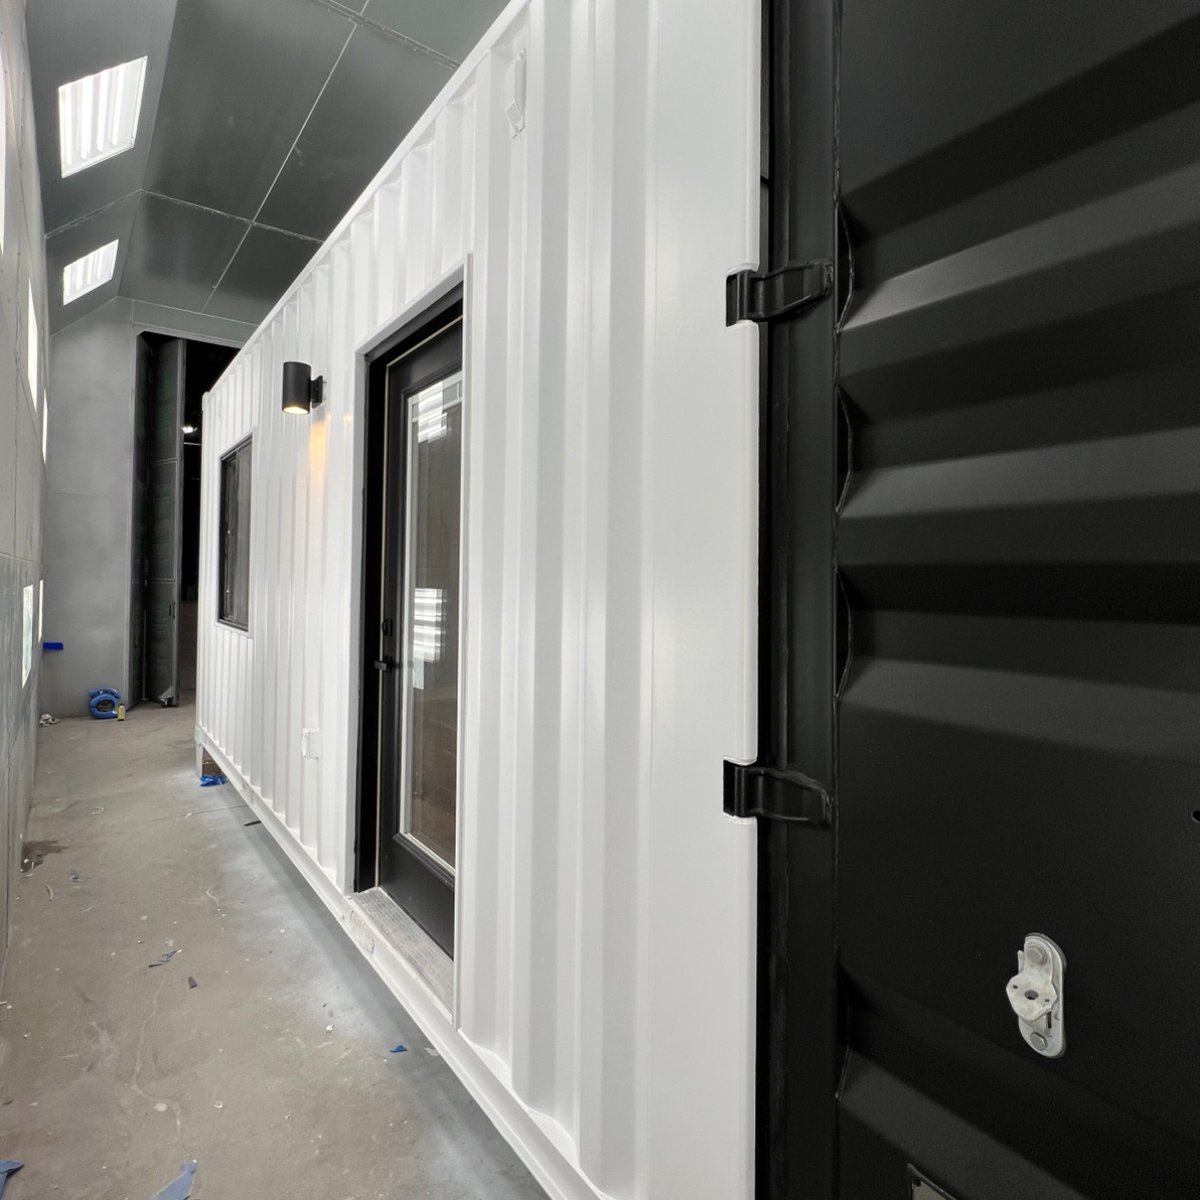 What comes to mind when you think #shippingcontainer? 
✅ Beautiful Design
✅ Long-lasting
✅ Eco-Friendly
✅ Accessory Dwelling Unit (ADU) 

Yes, we do that!
#Chicagobuilder #Sustainablebuild #Builtforyourpurpose